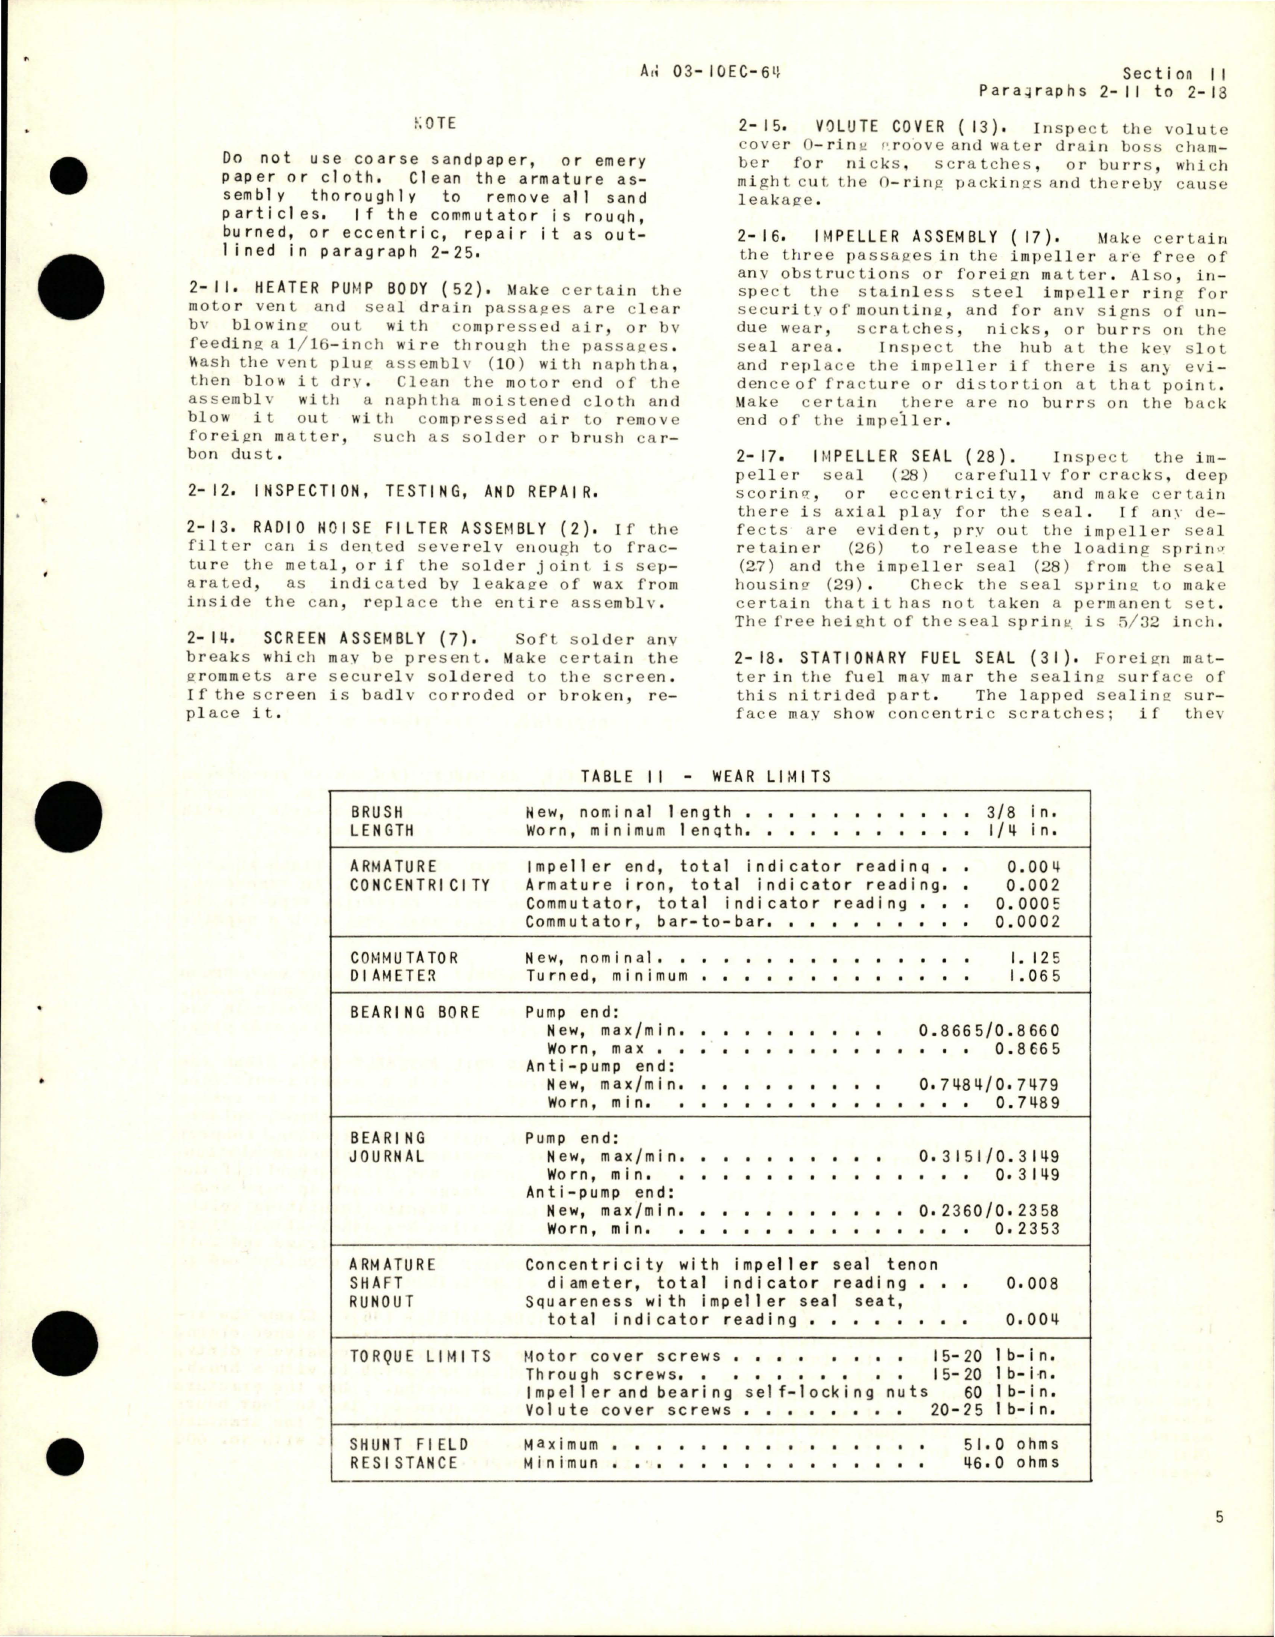 Sample page 7 from AirCorps Library document: Overhaul Instructions for Submerged Heater Pump - Model TF-53300-1